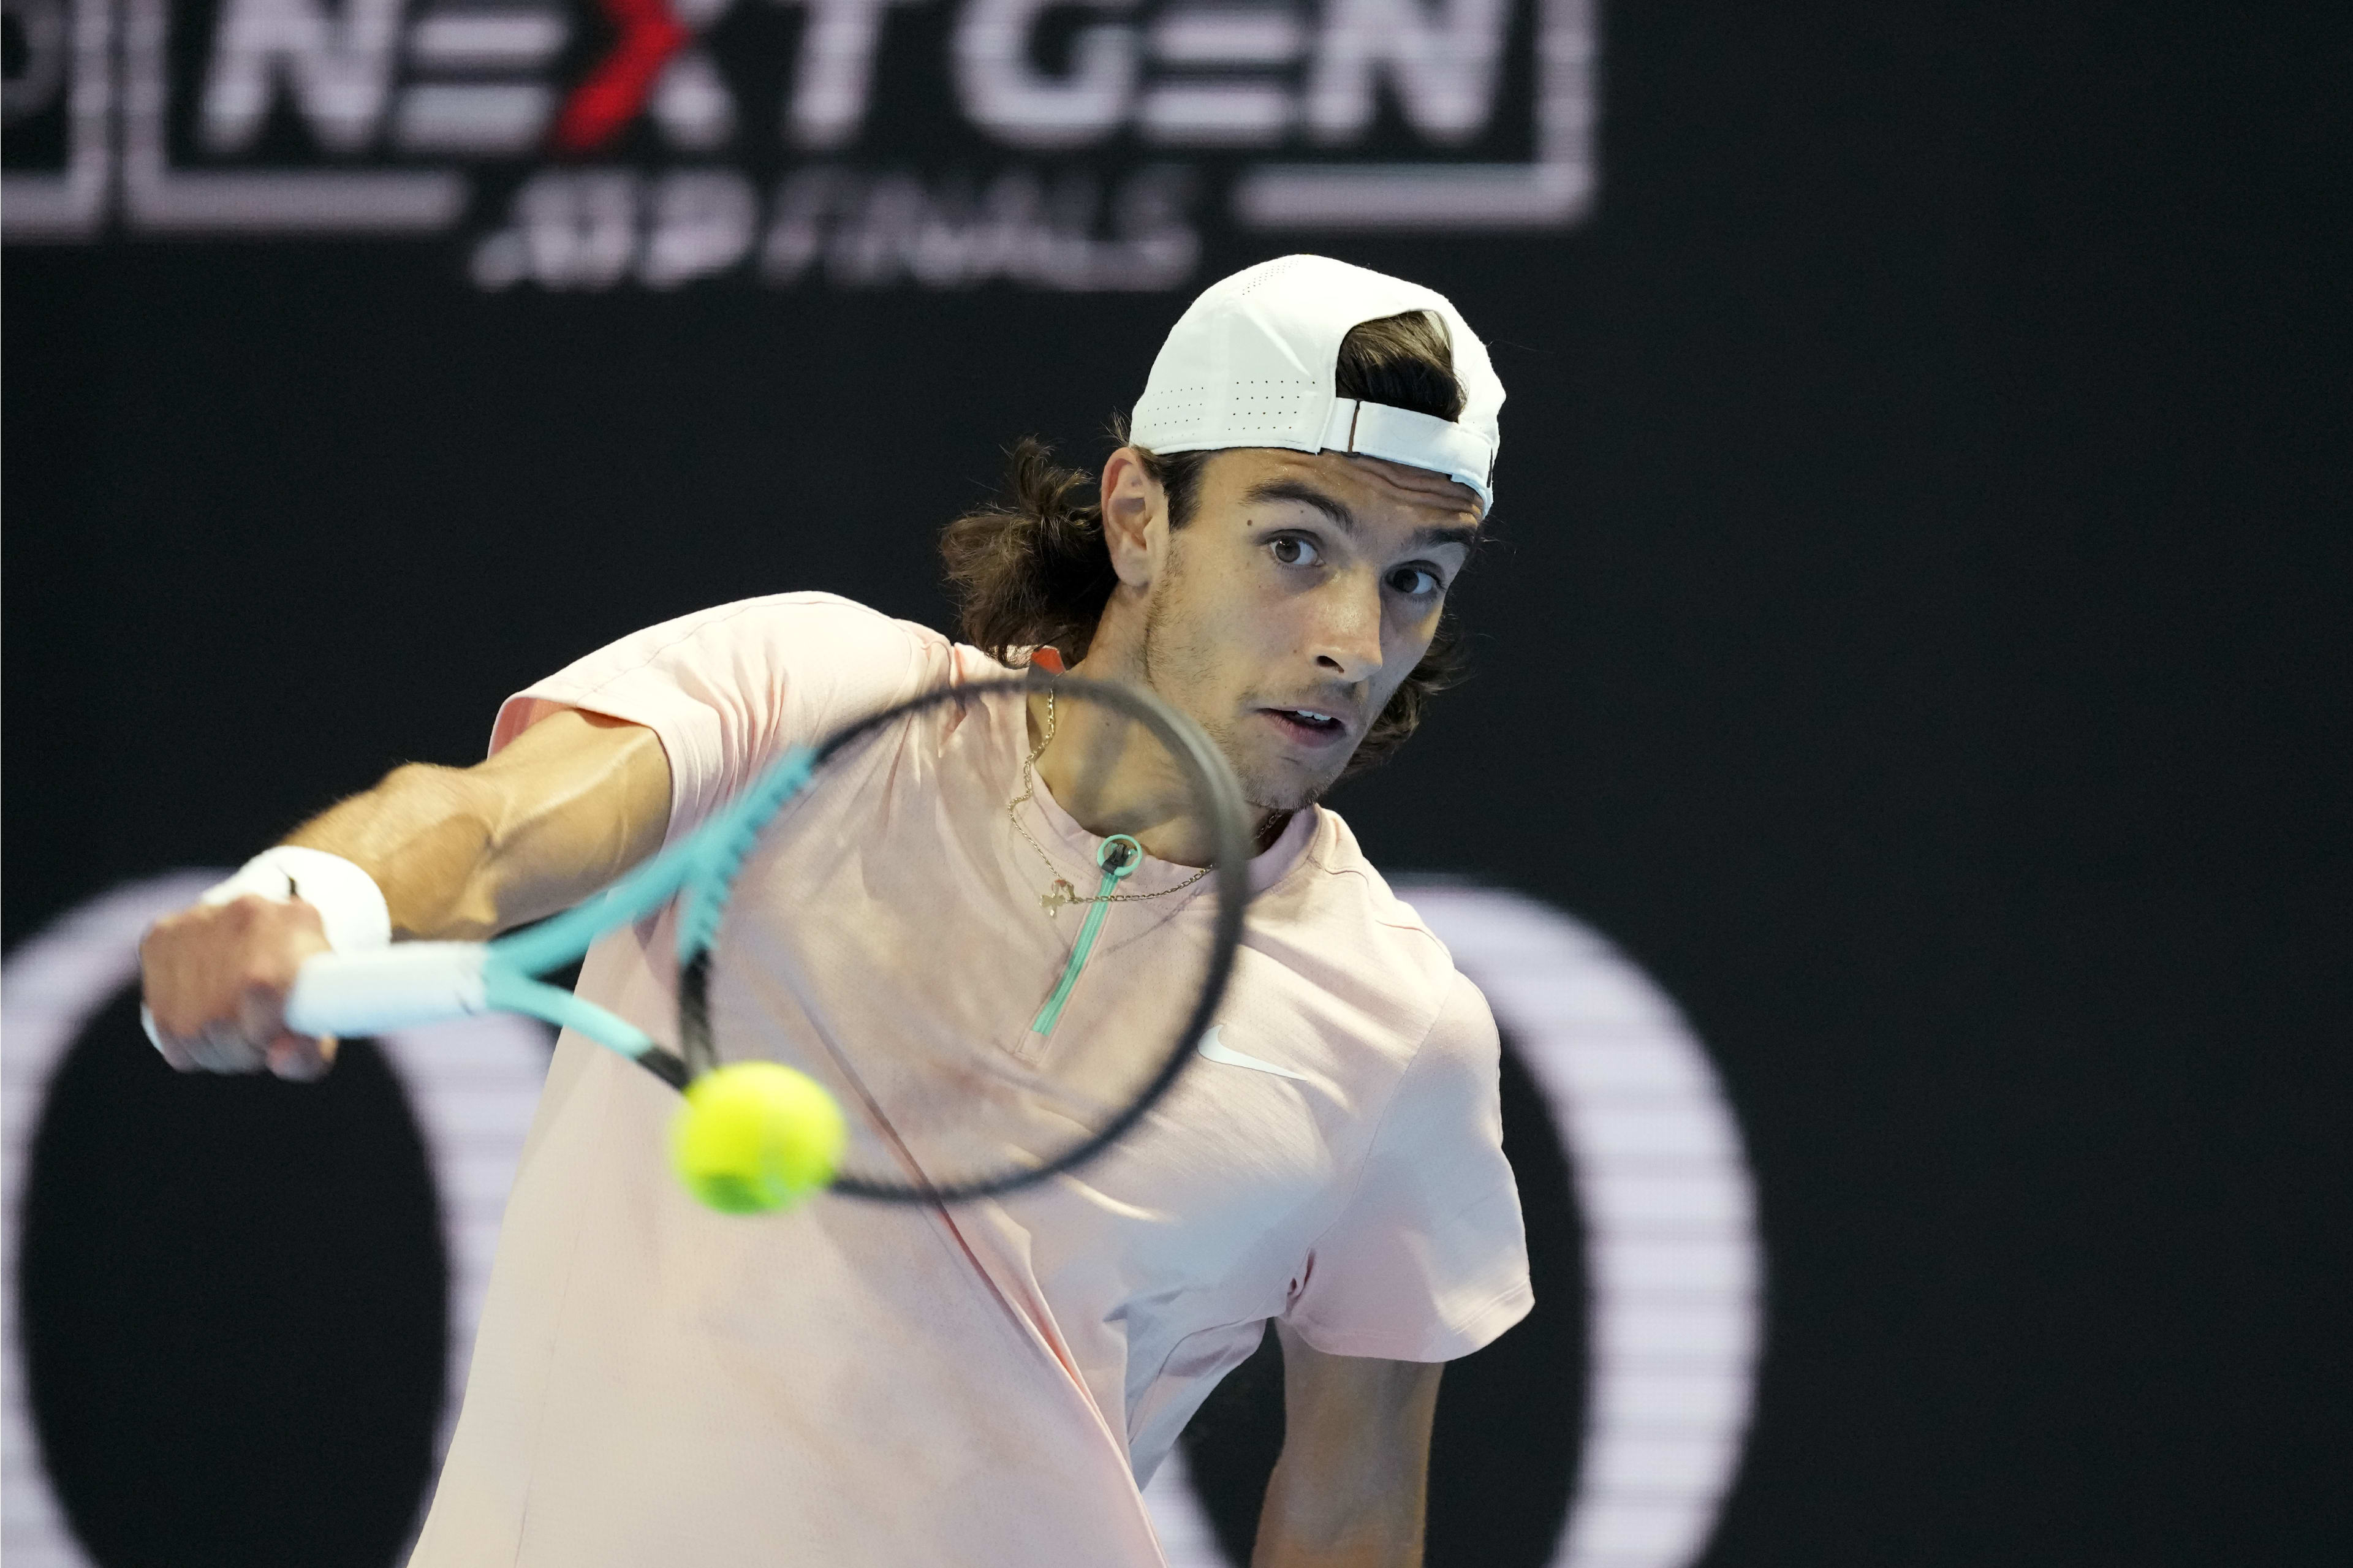 Musetti gets off to strong start at Next Gen ATP Finals